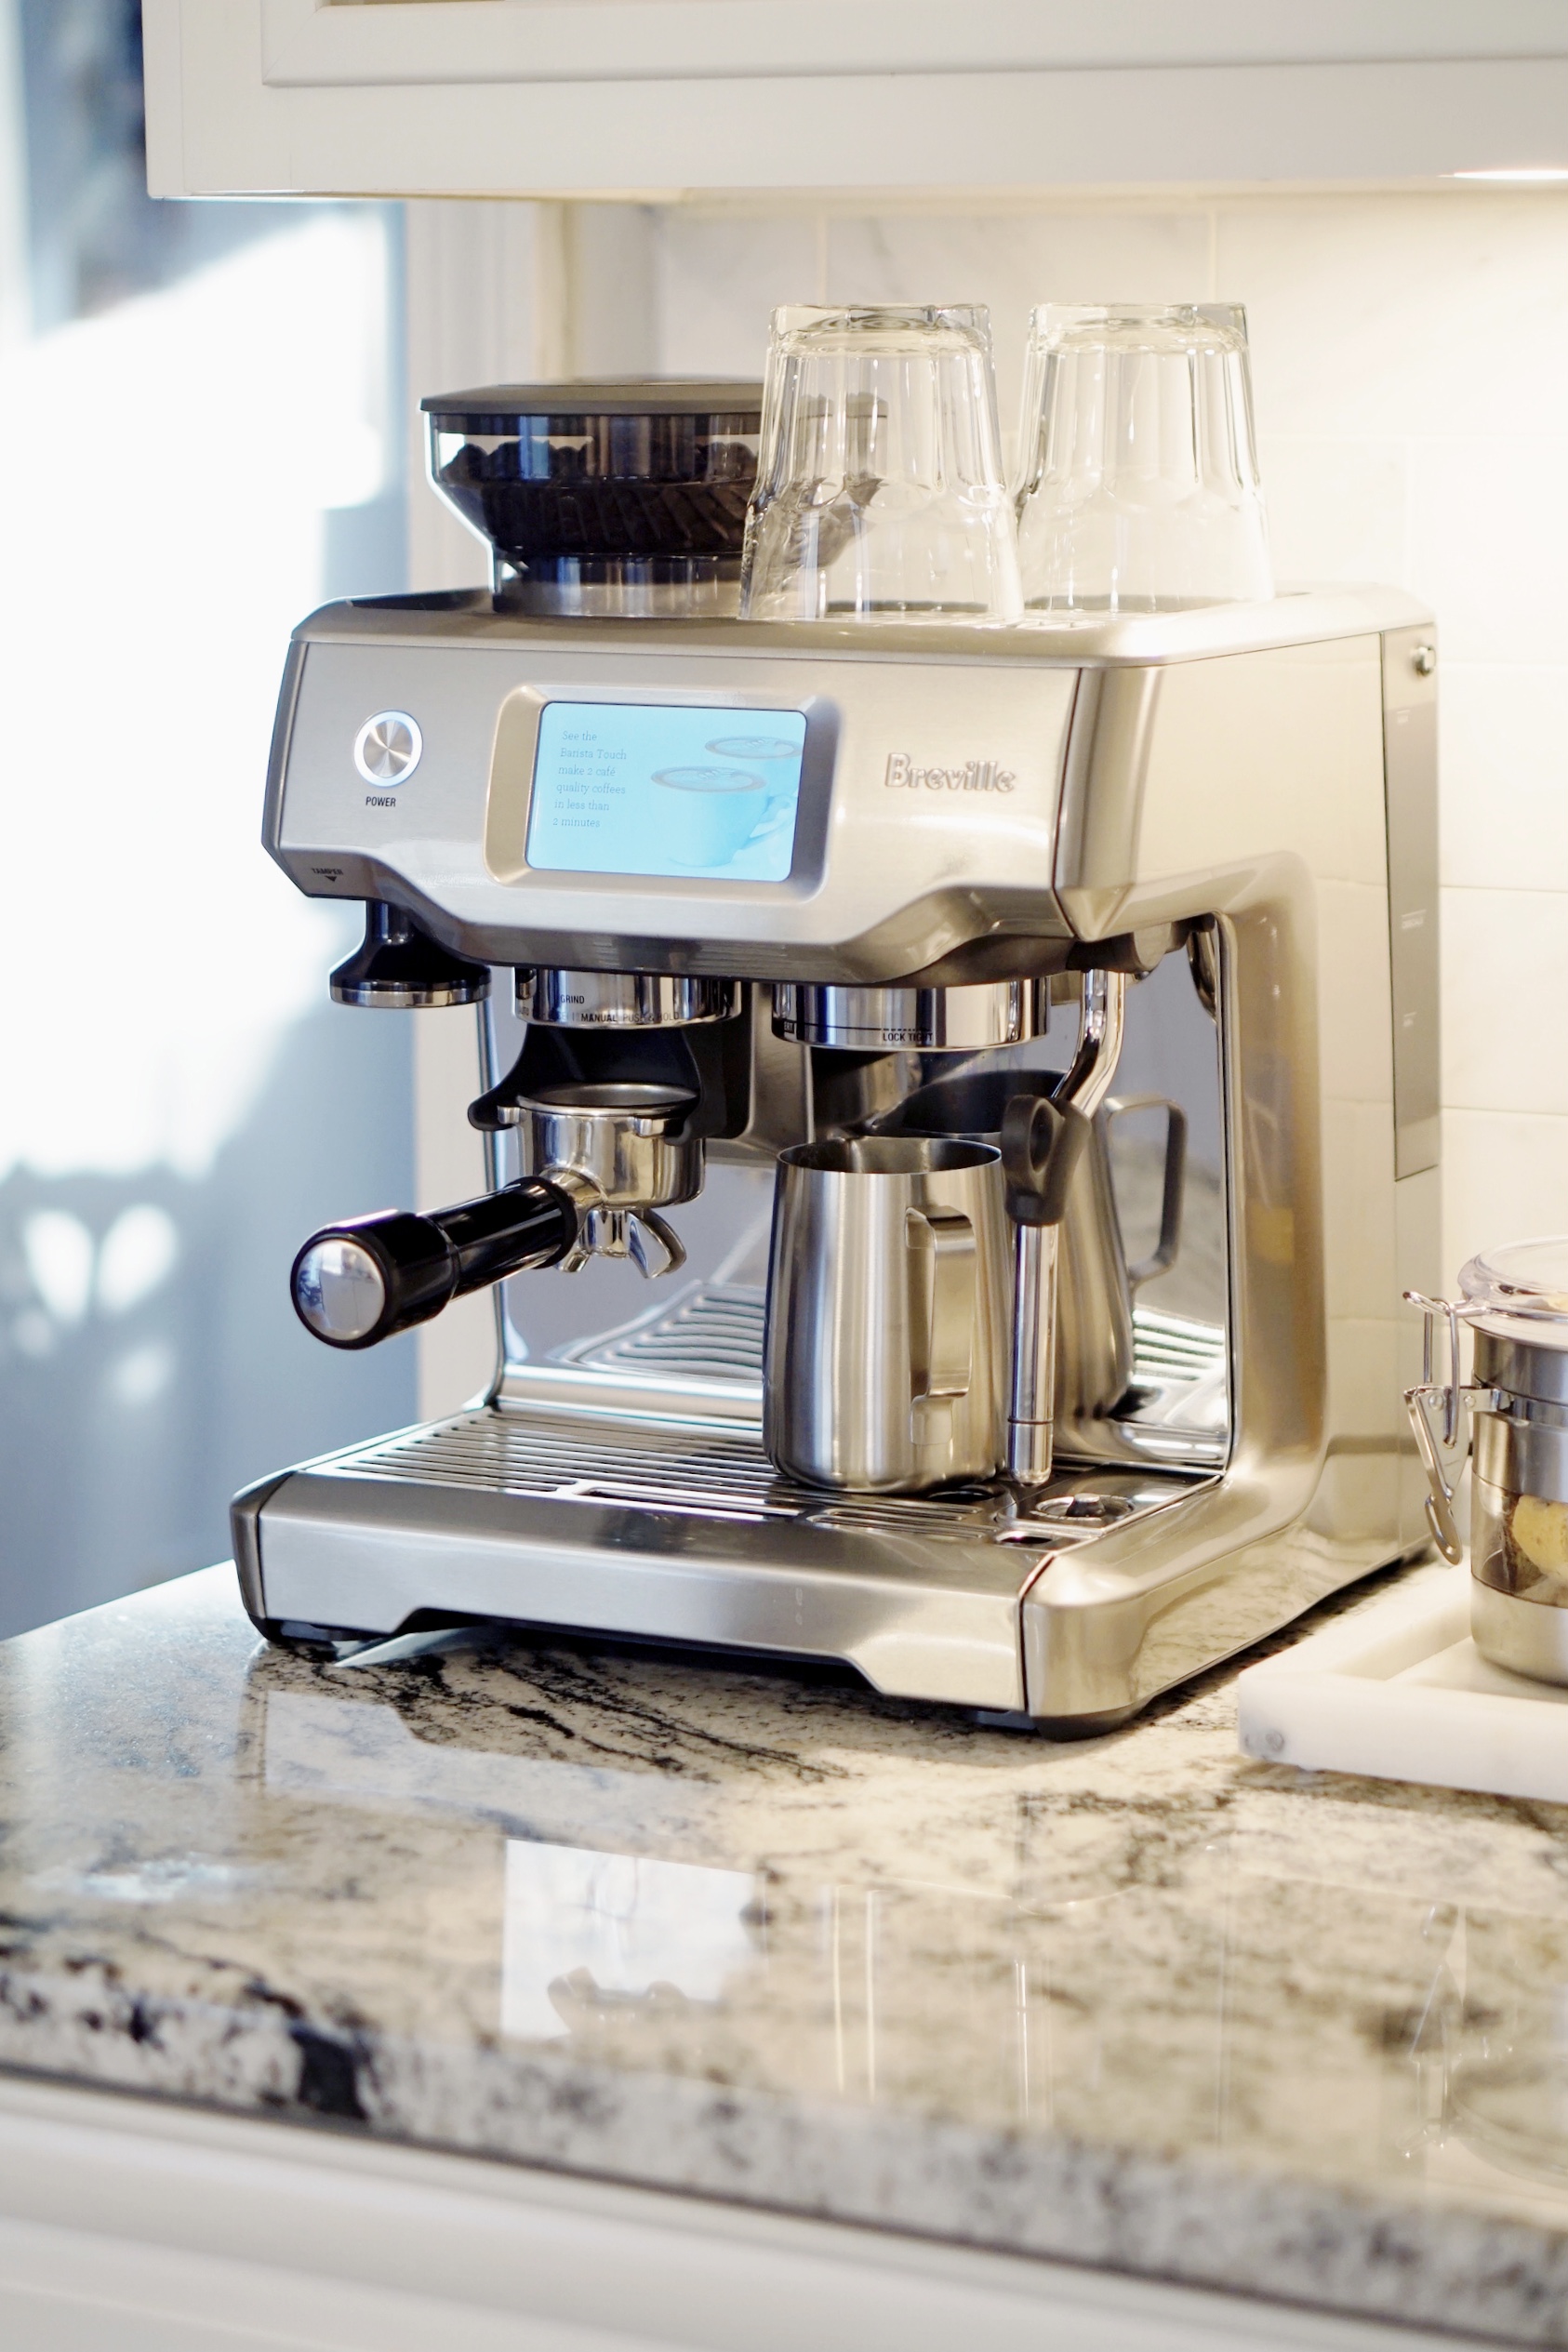 Sage Barista Express Bean to Cup Coffee Machine Review - Shop Best Coffee